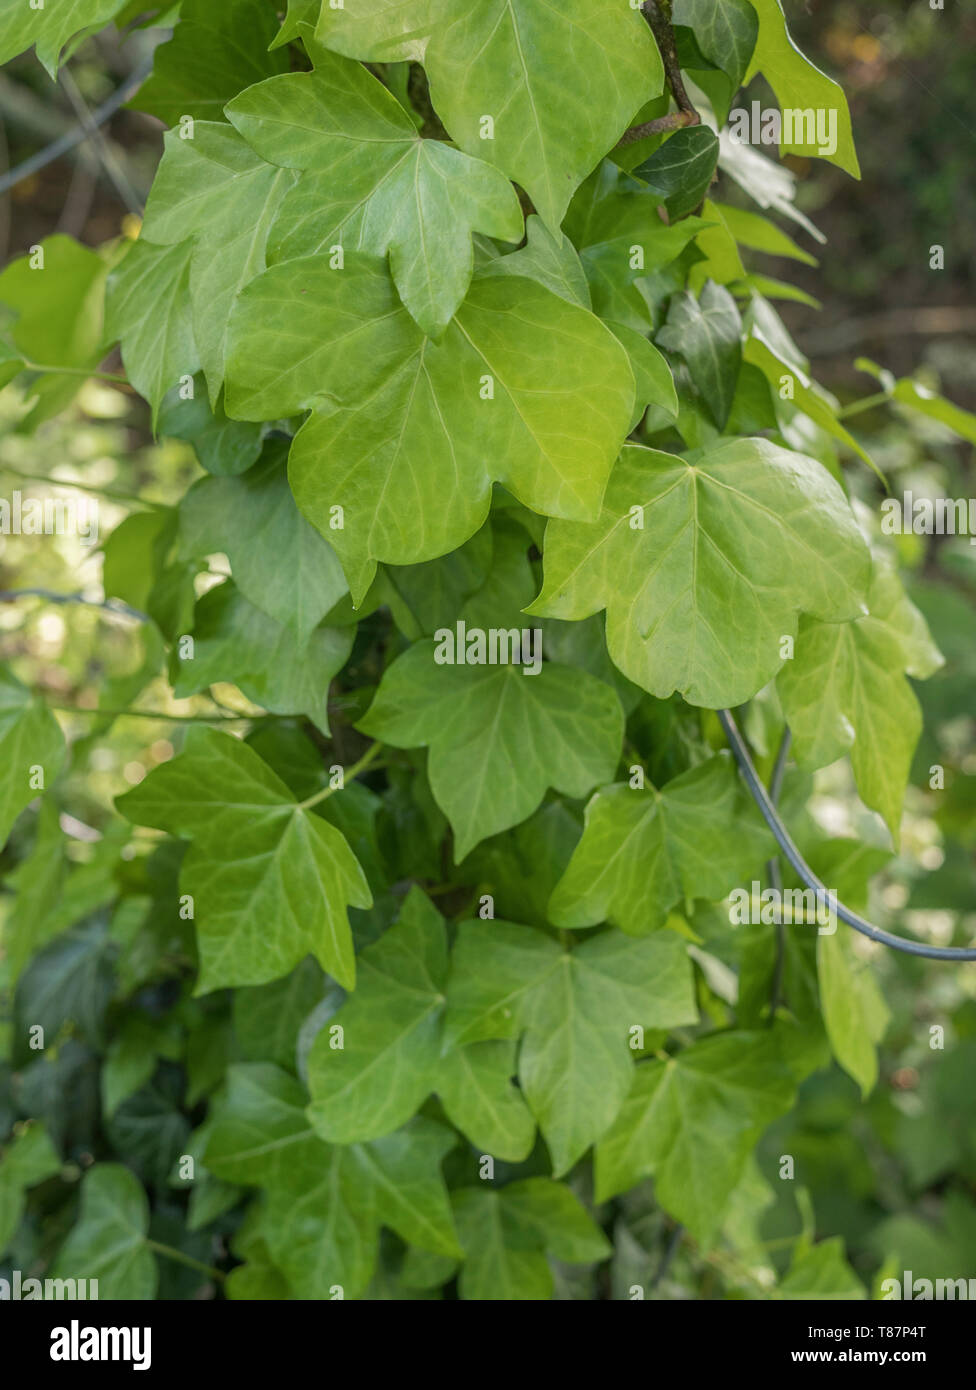 Climbing ivy / Common Ivy - Hedera helix - growing up the side of a concrete fence pole. Creeping ivy concept. Ivy plant on fence. Stock Photo